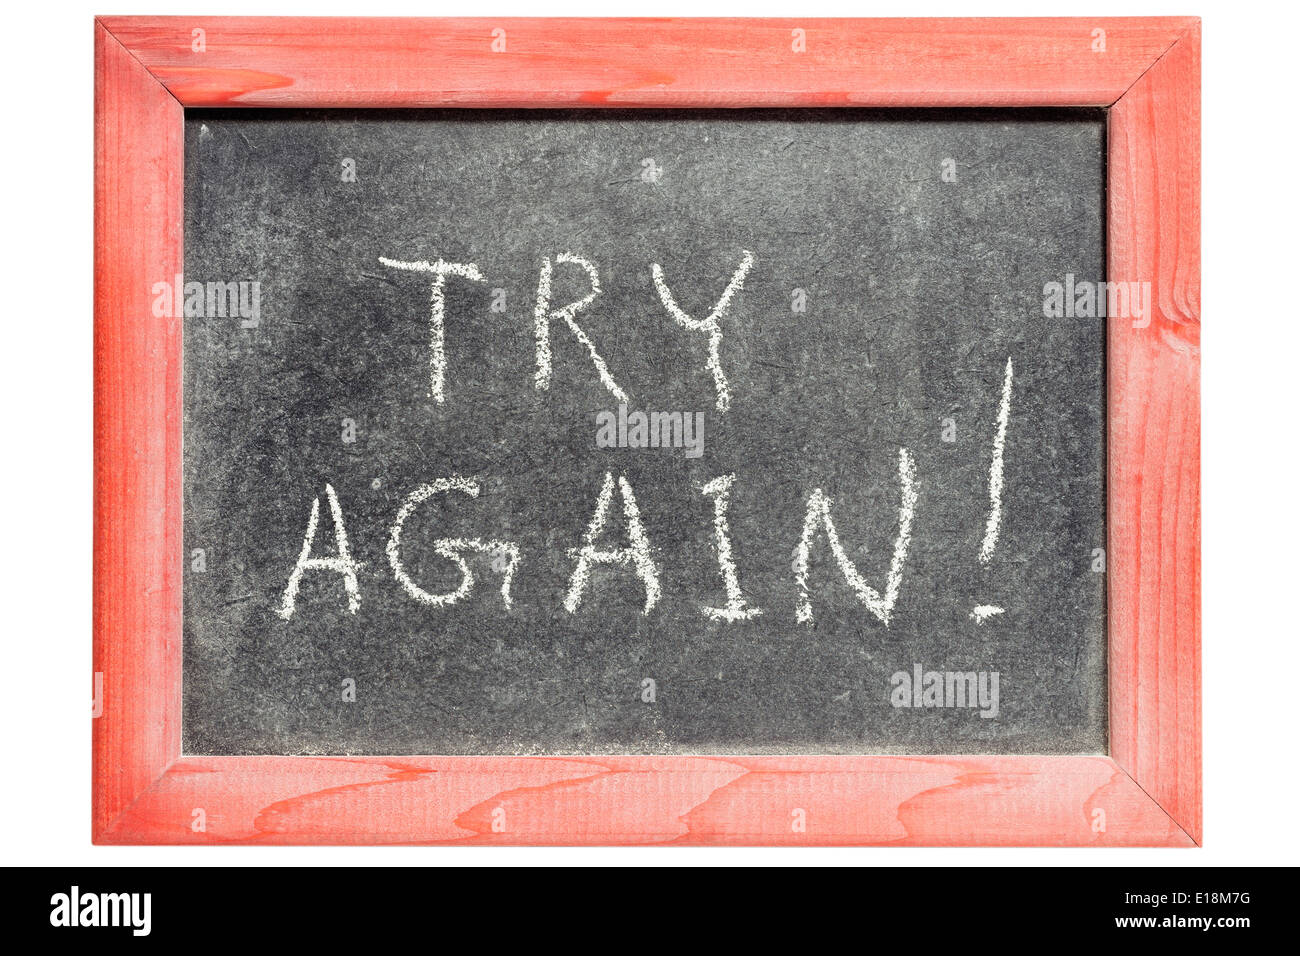 try again exclamation handwritten on isolated vintage blackboard Stock Photo